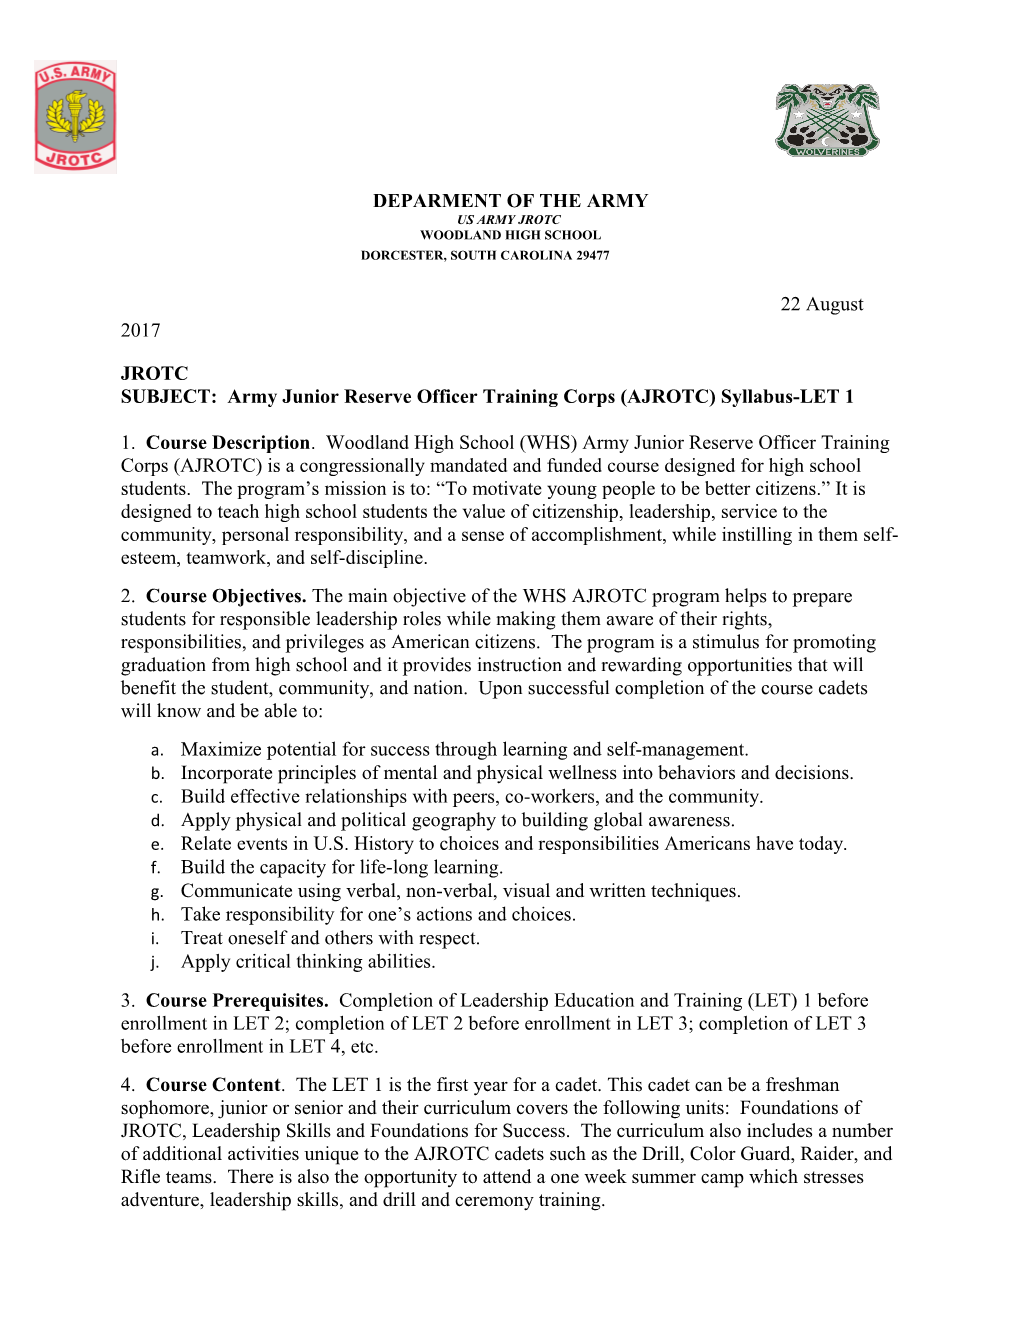 SUBJECT: Army Junior Reserve Officer Training Corps (AJROTC) Syllabus-LET 1